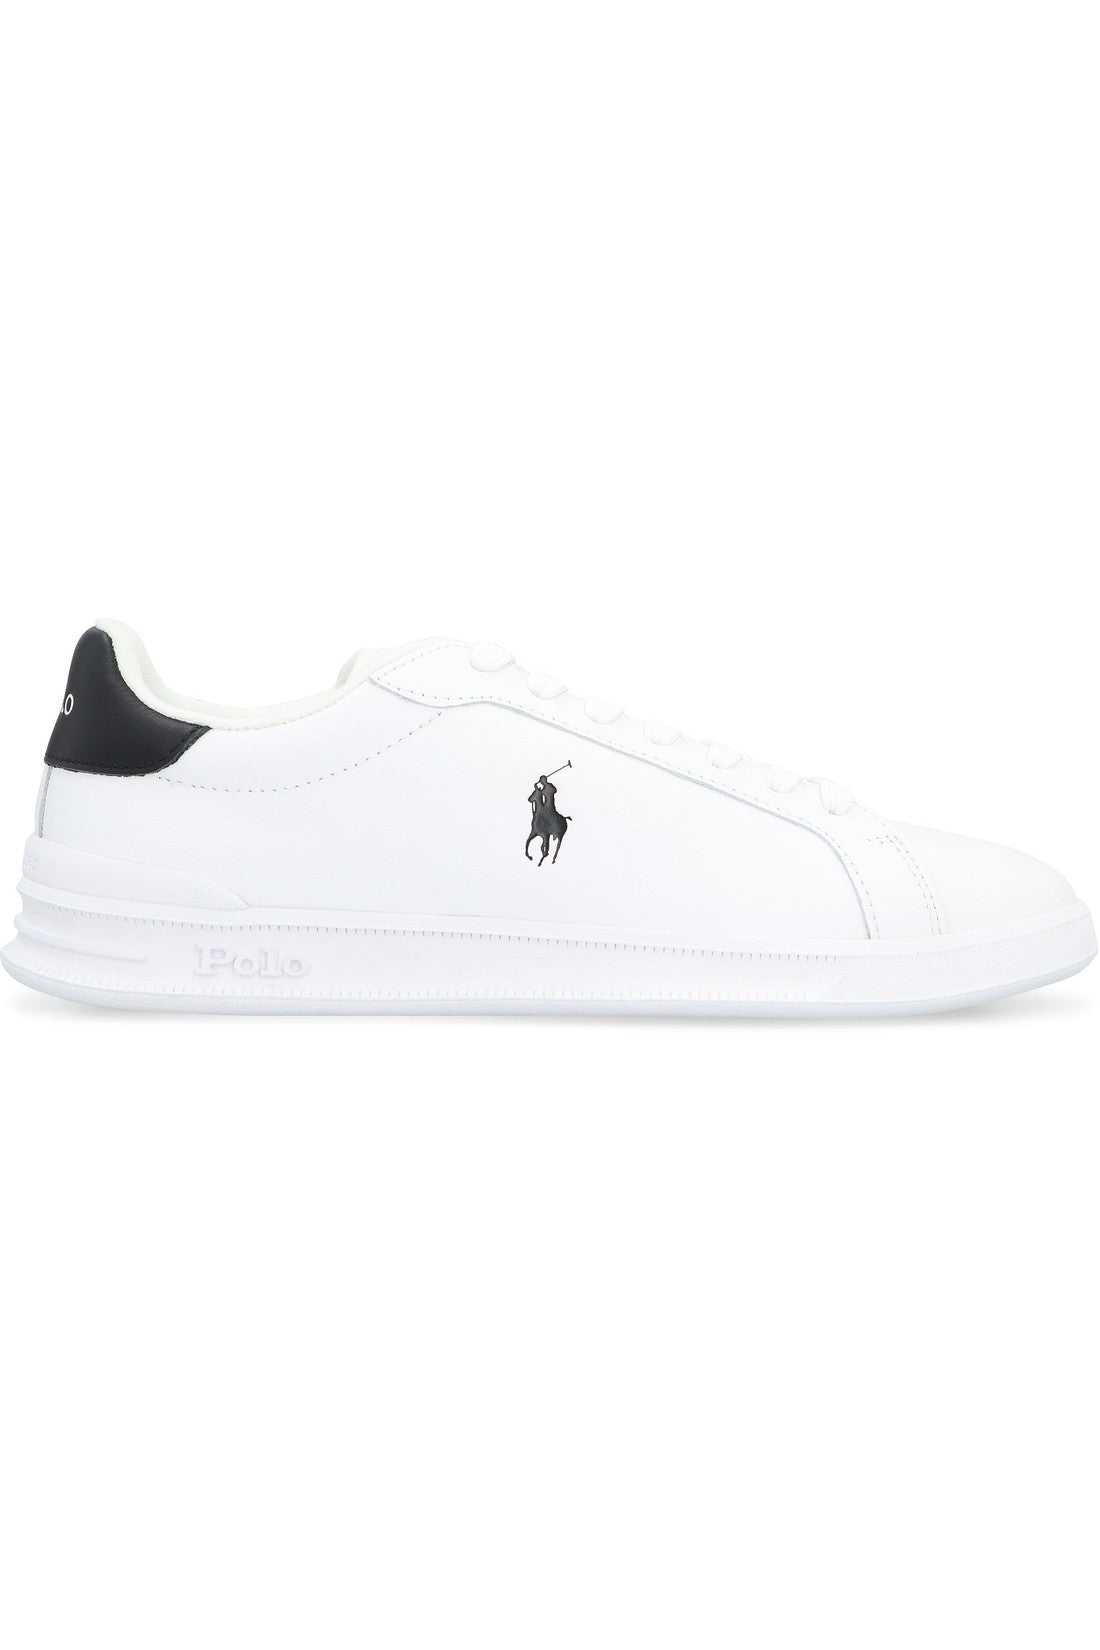 Polo Ralph Lauren-OUTLET-SALE-Heritage Court II leather low-top sneakers-ARCHIVIST